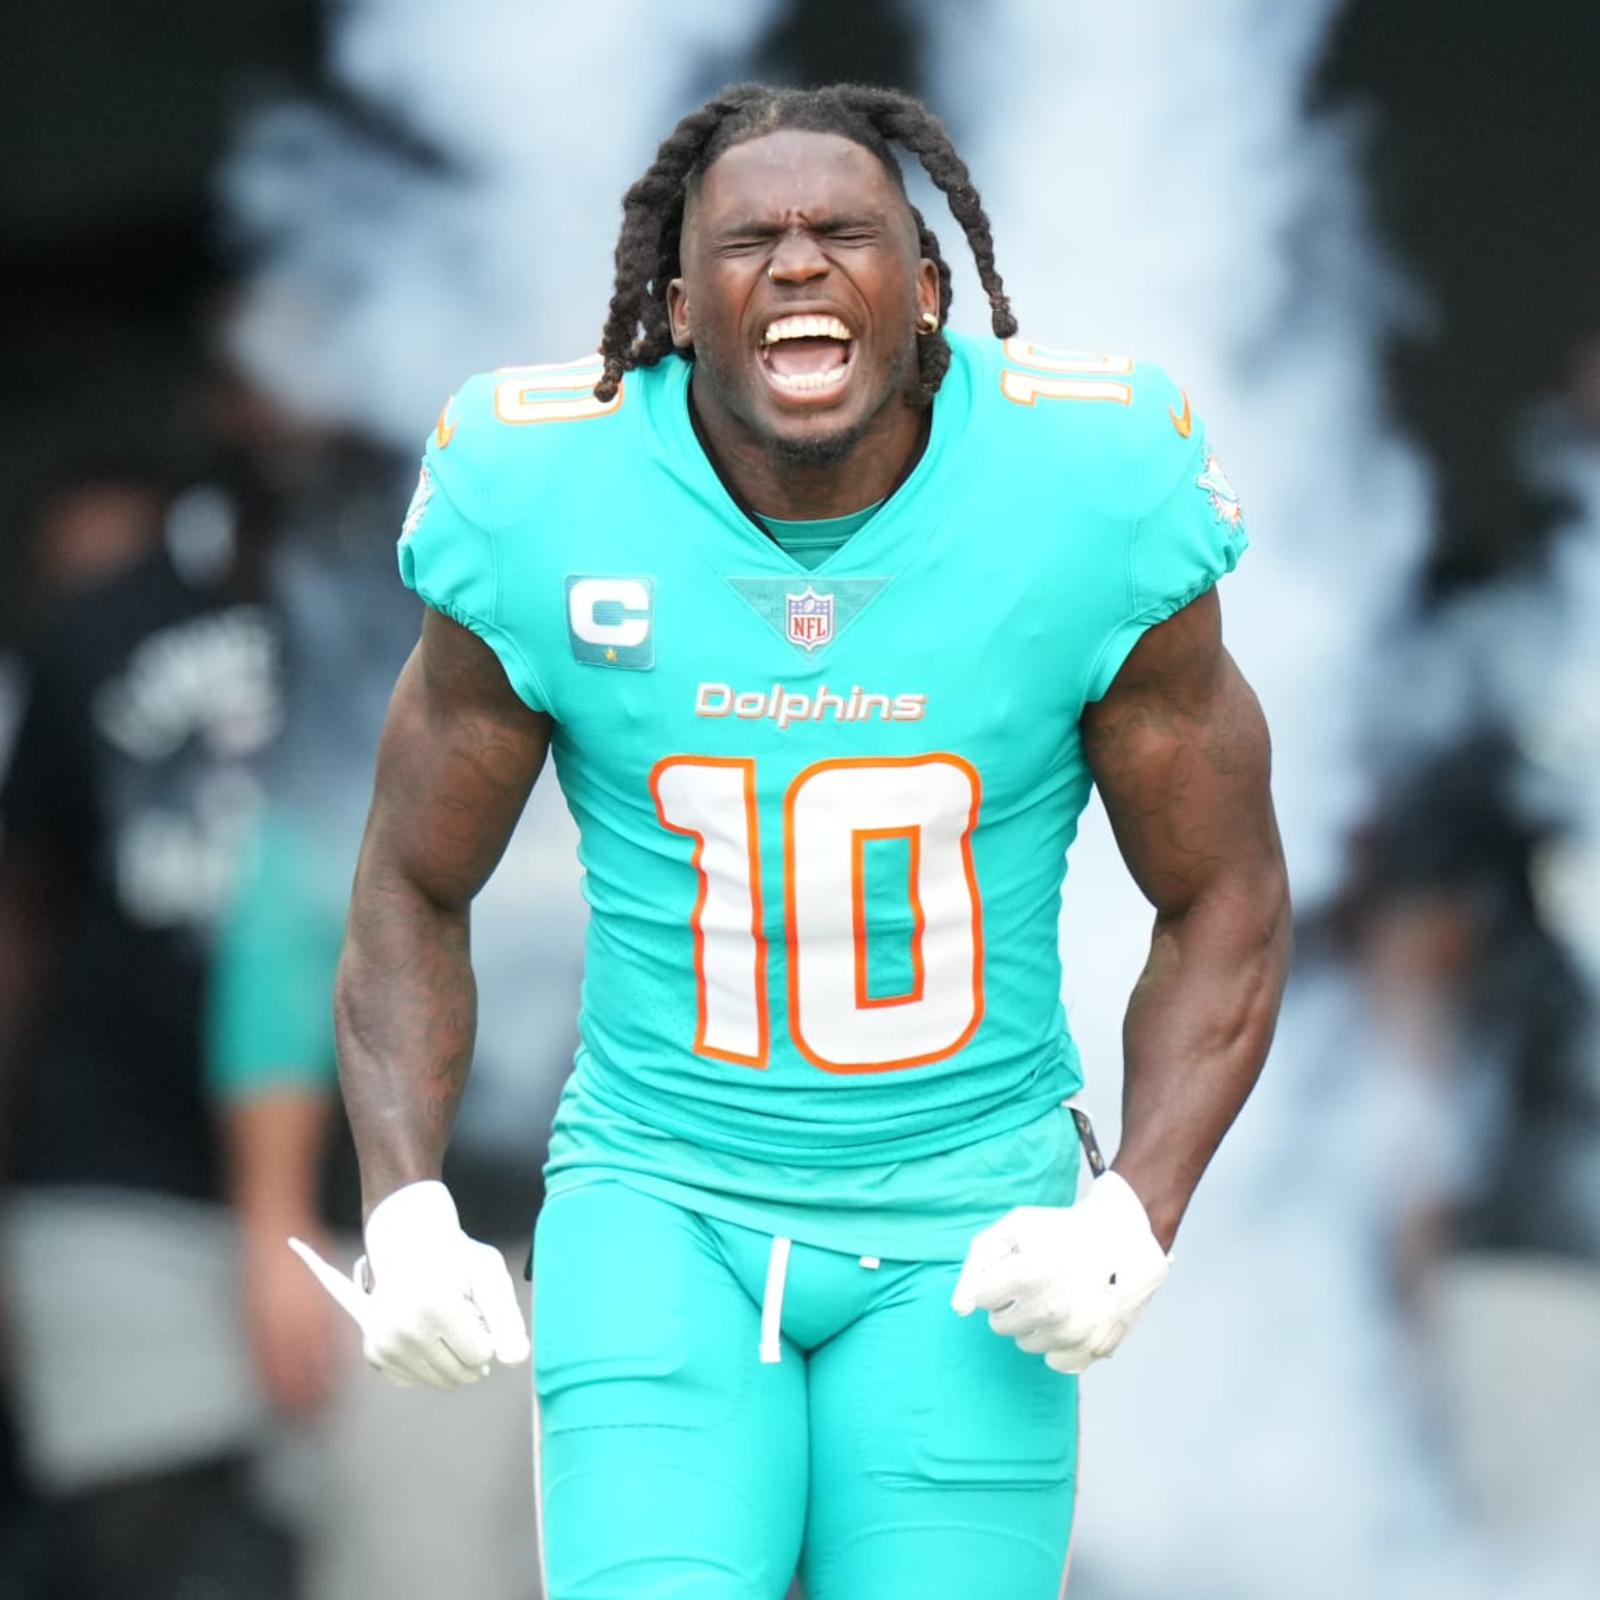 Dolphins Tyreek Hill offering fans VIP opportunity for charity